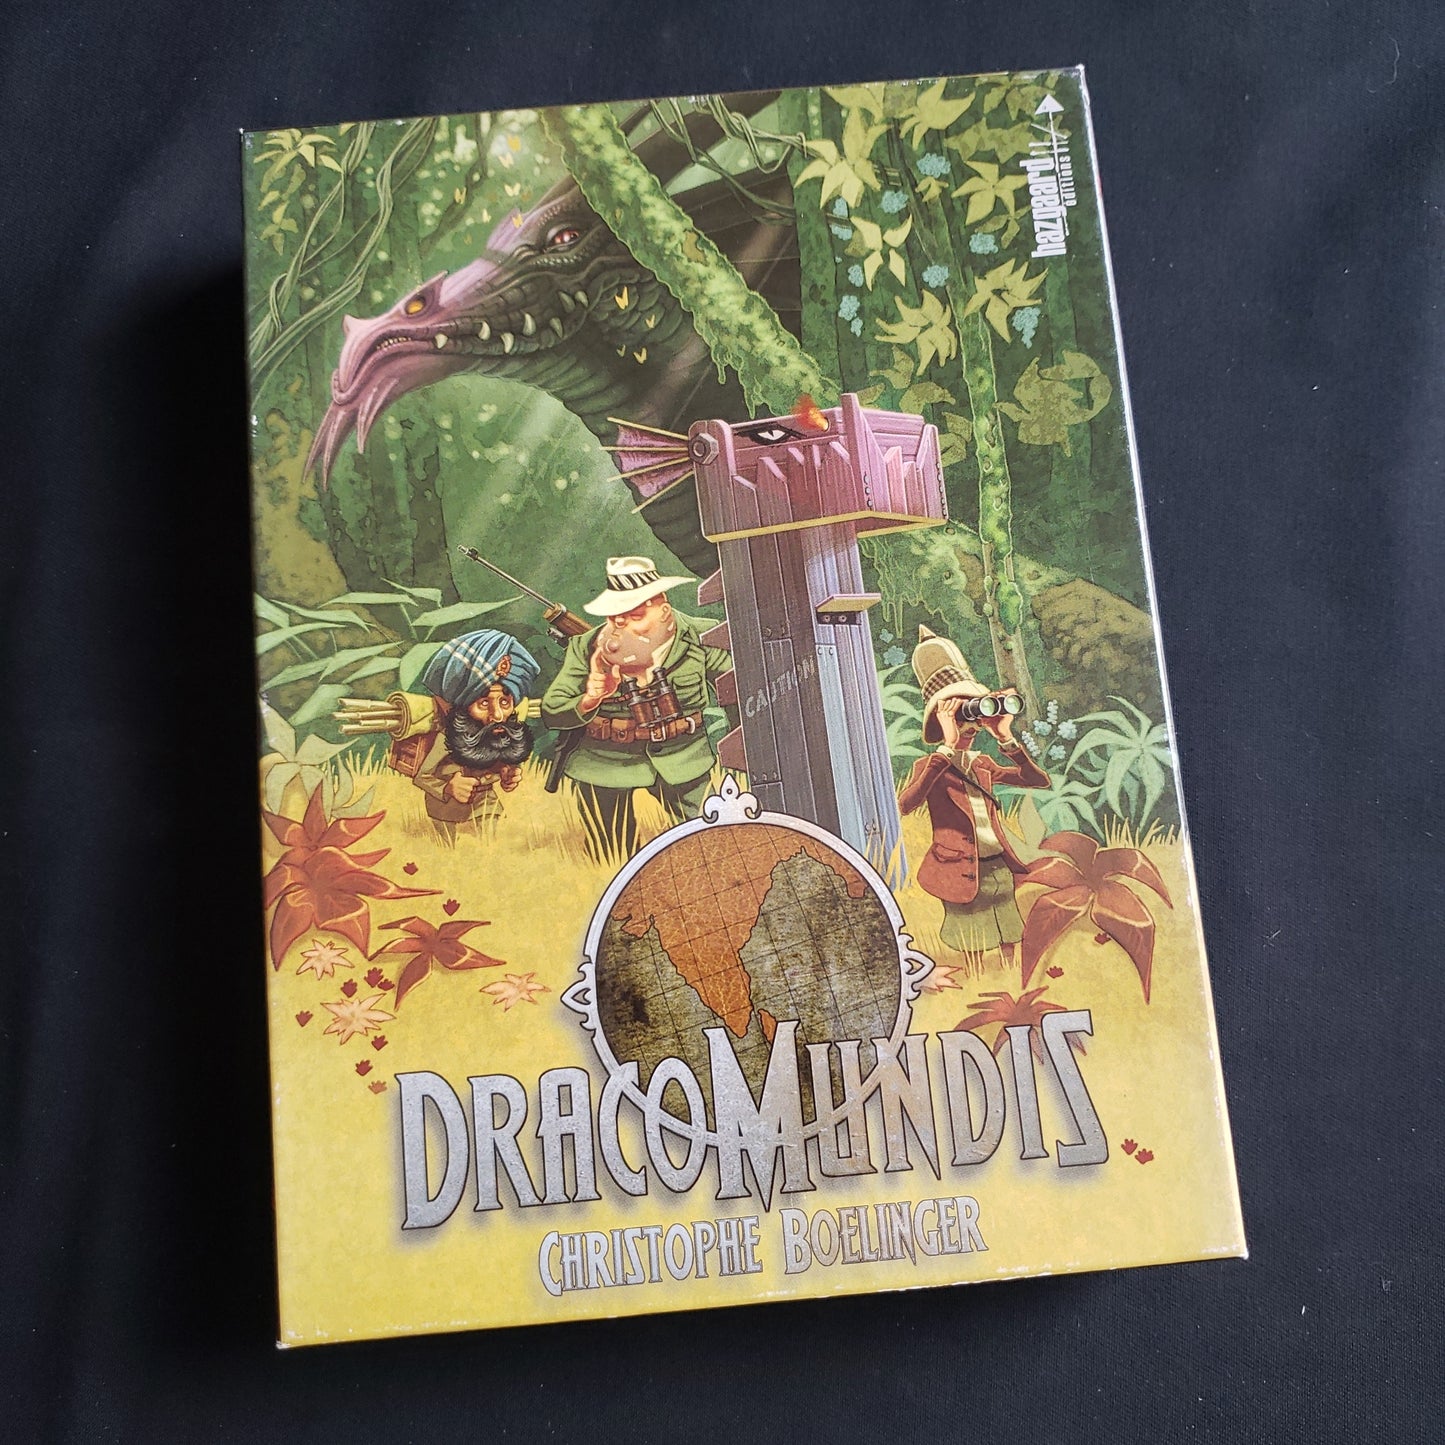 Image shows the front cover of the box of the Draco Mundis board game